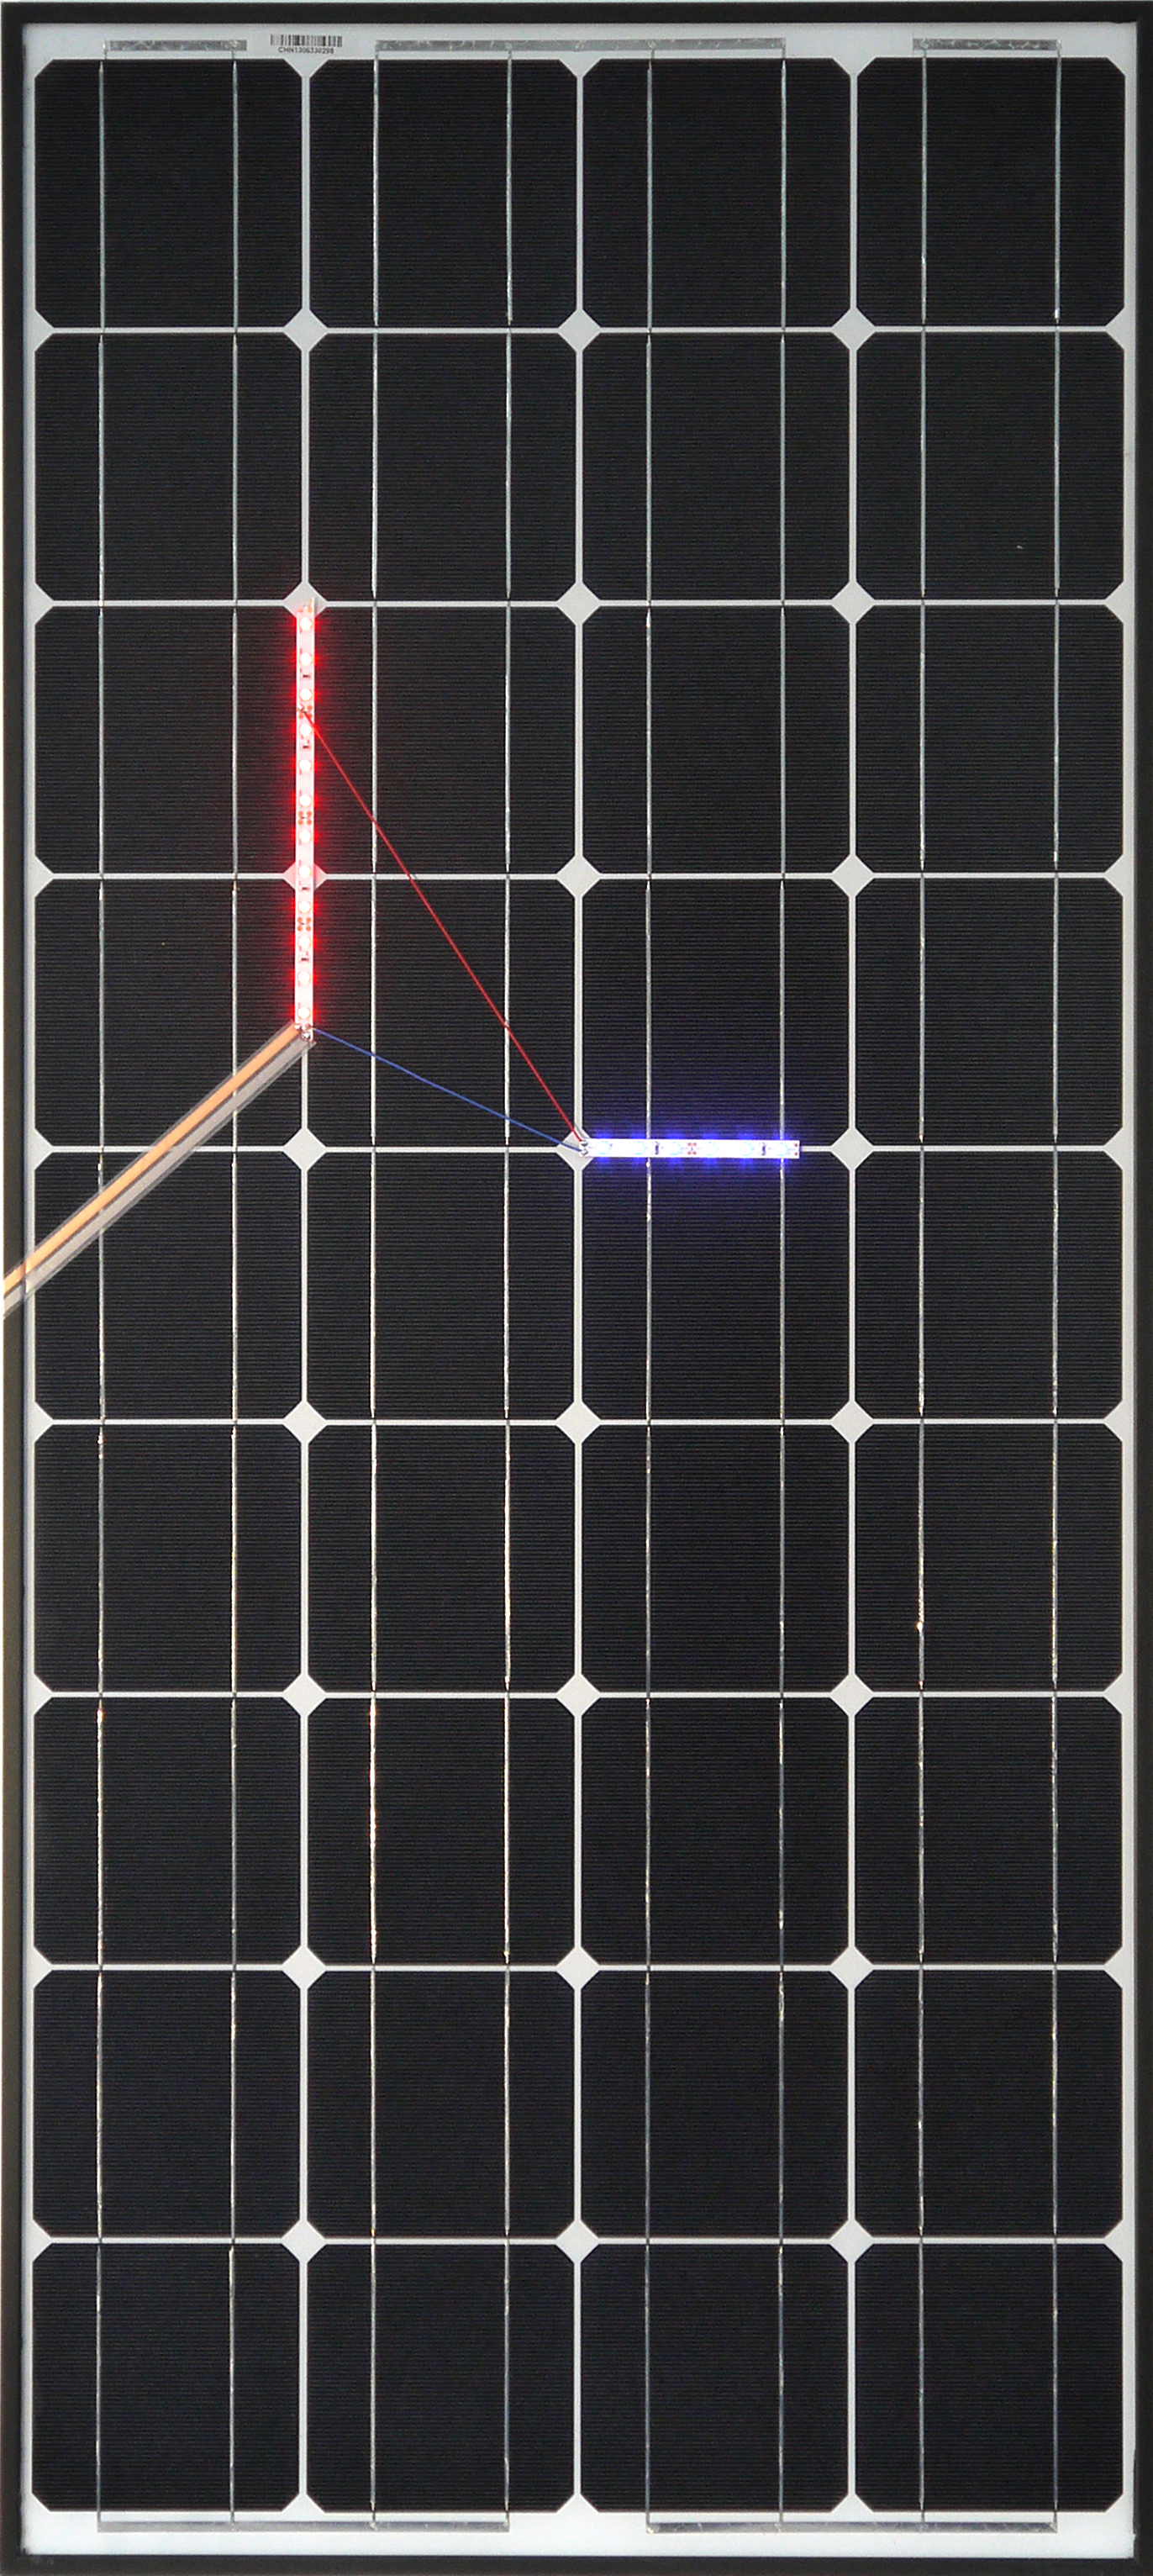 Haroon Mirza, Solar Powered LED Circuit Composition 3, 2014